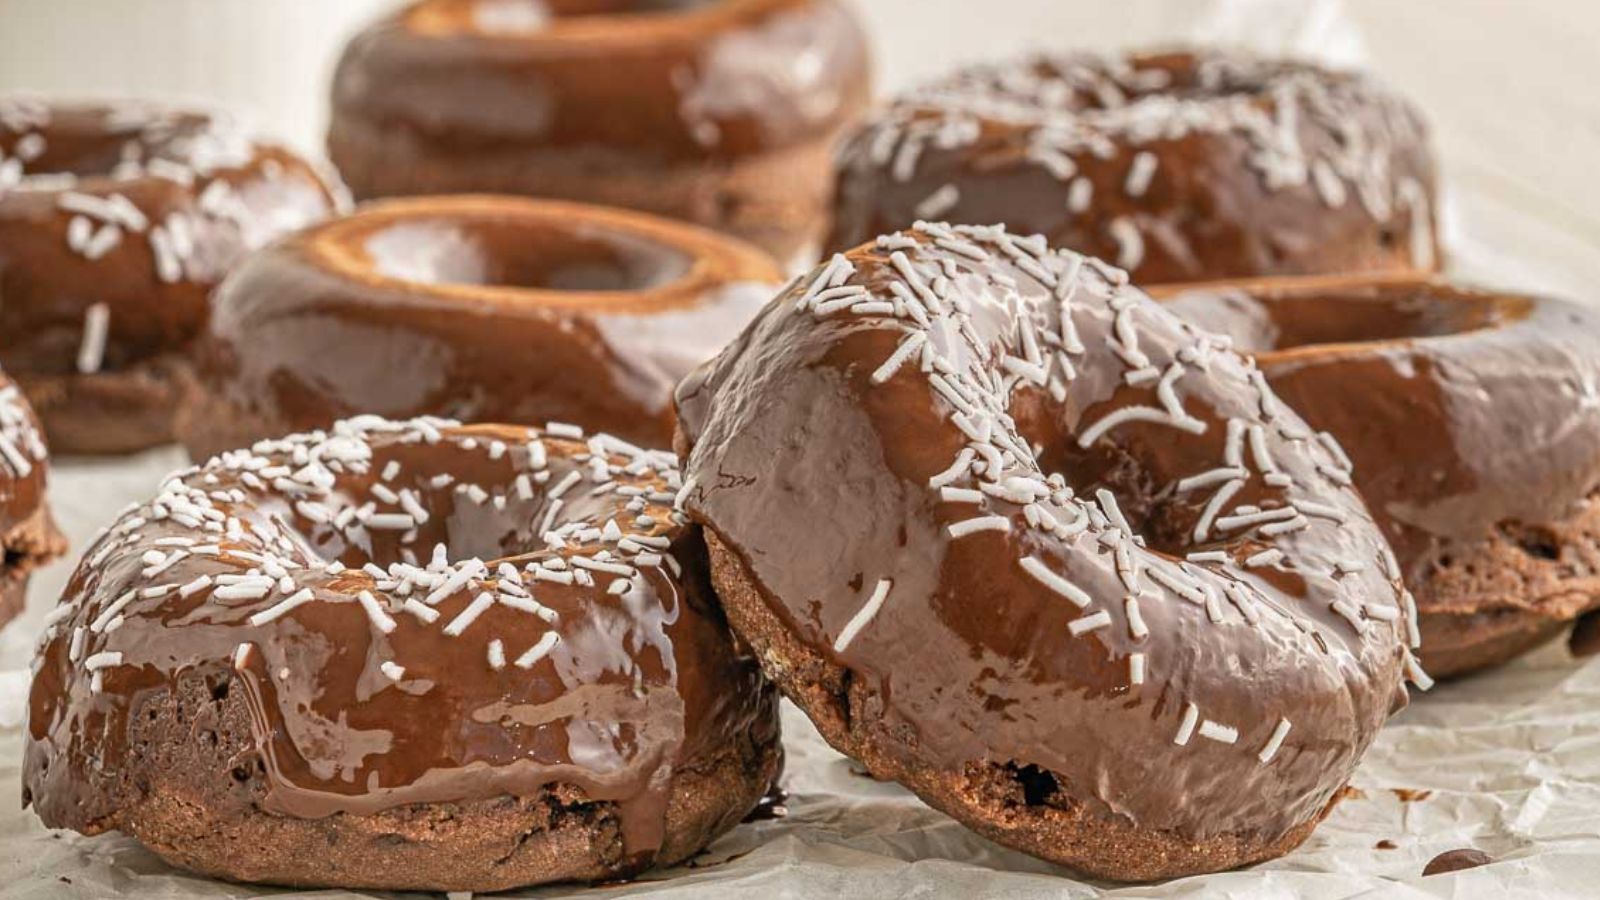 Chocolate covered donuts on a baking sheet.